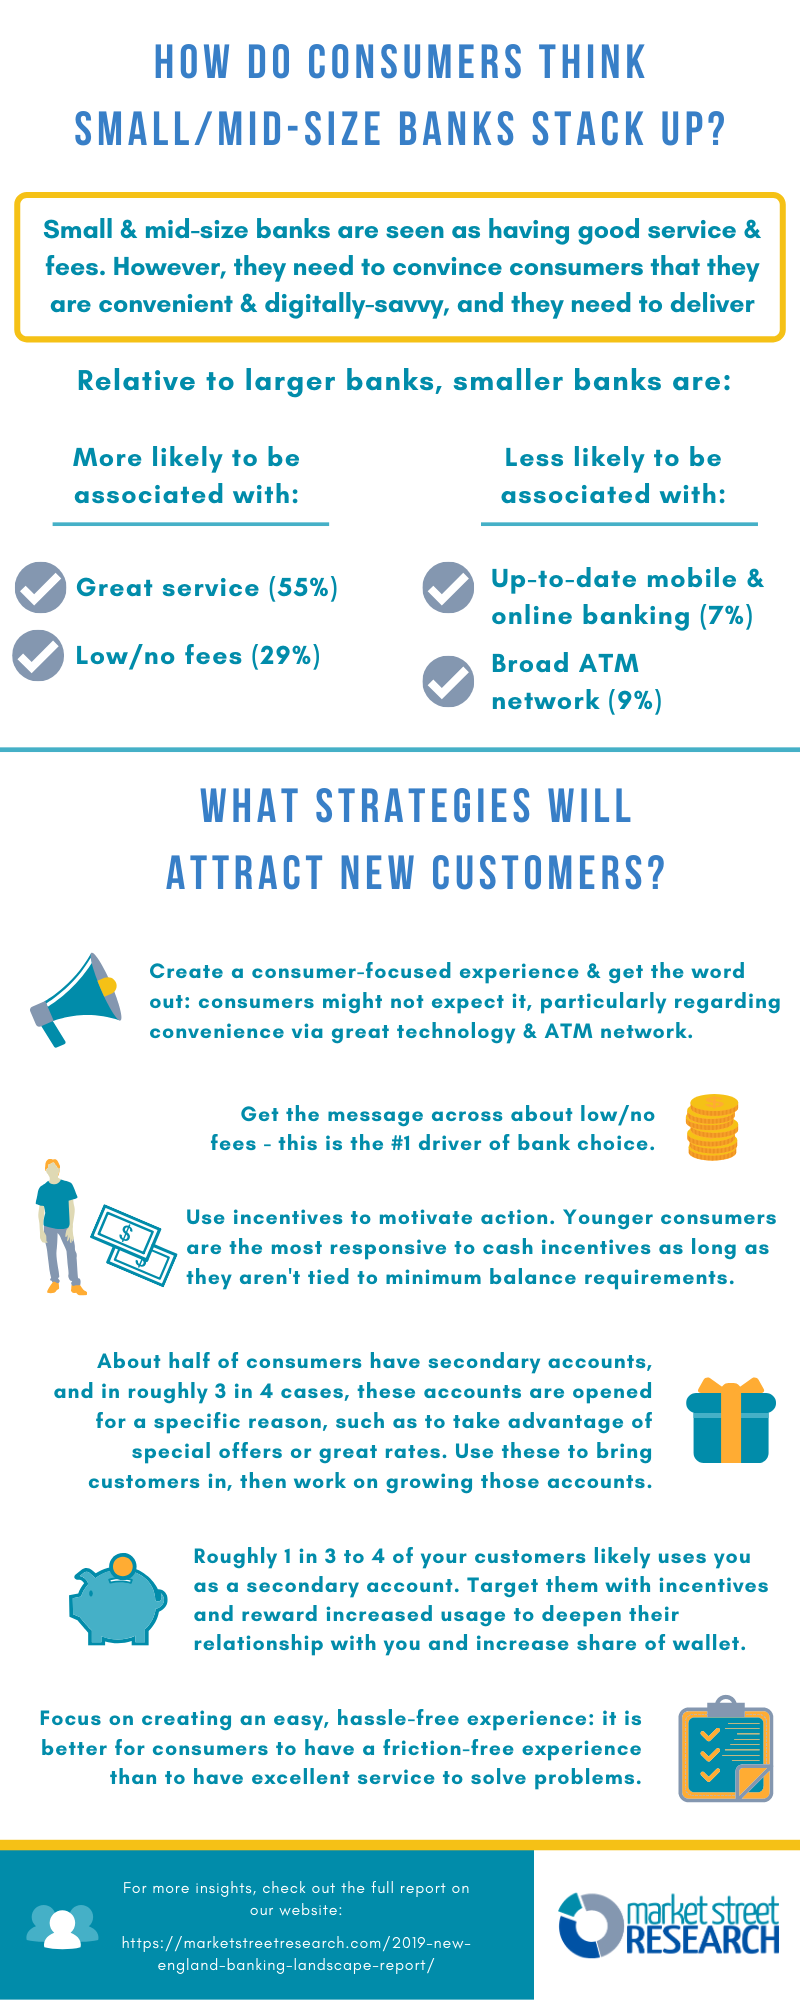 Page 2 of Banking Landscape Infographic, covering consumer impression of different size banks, and strategies to attract new customer